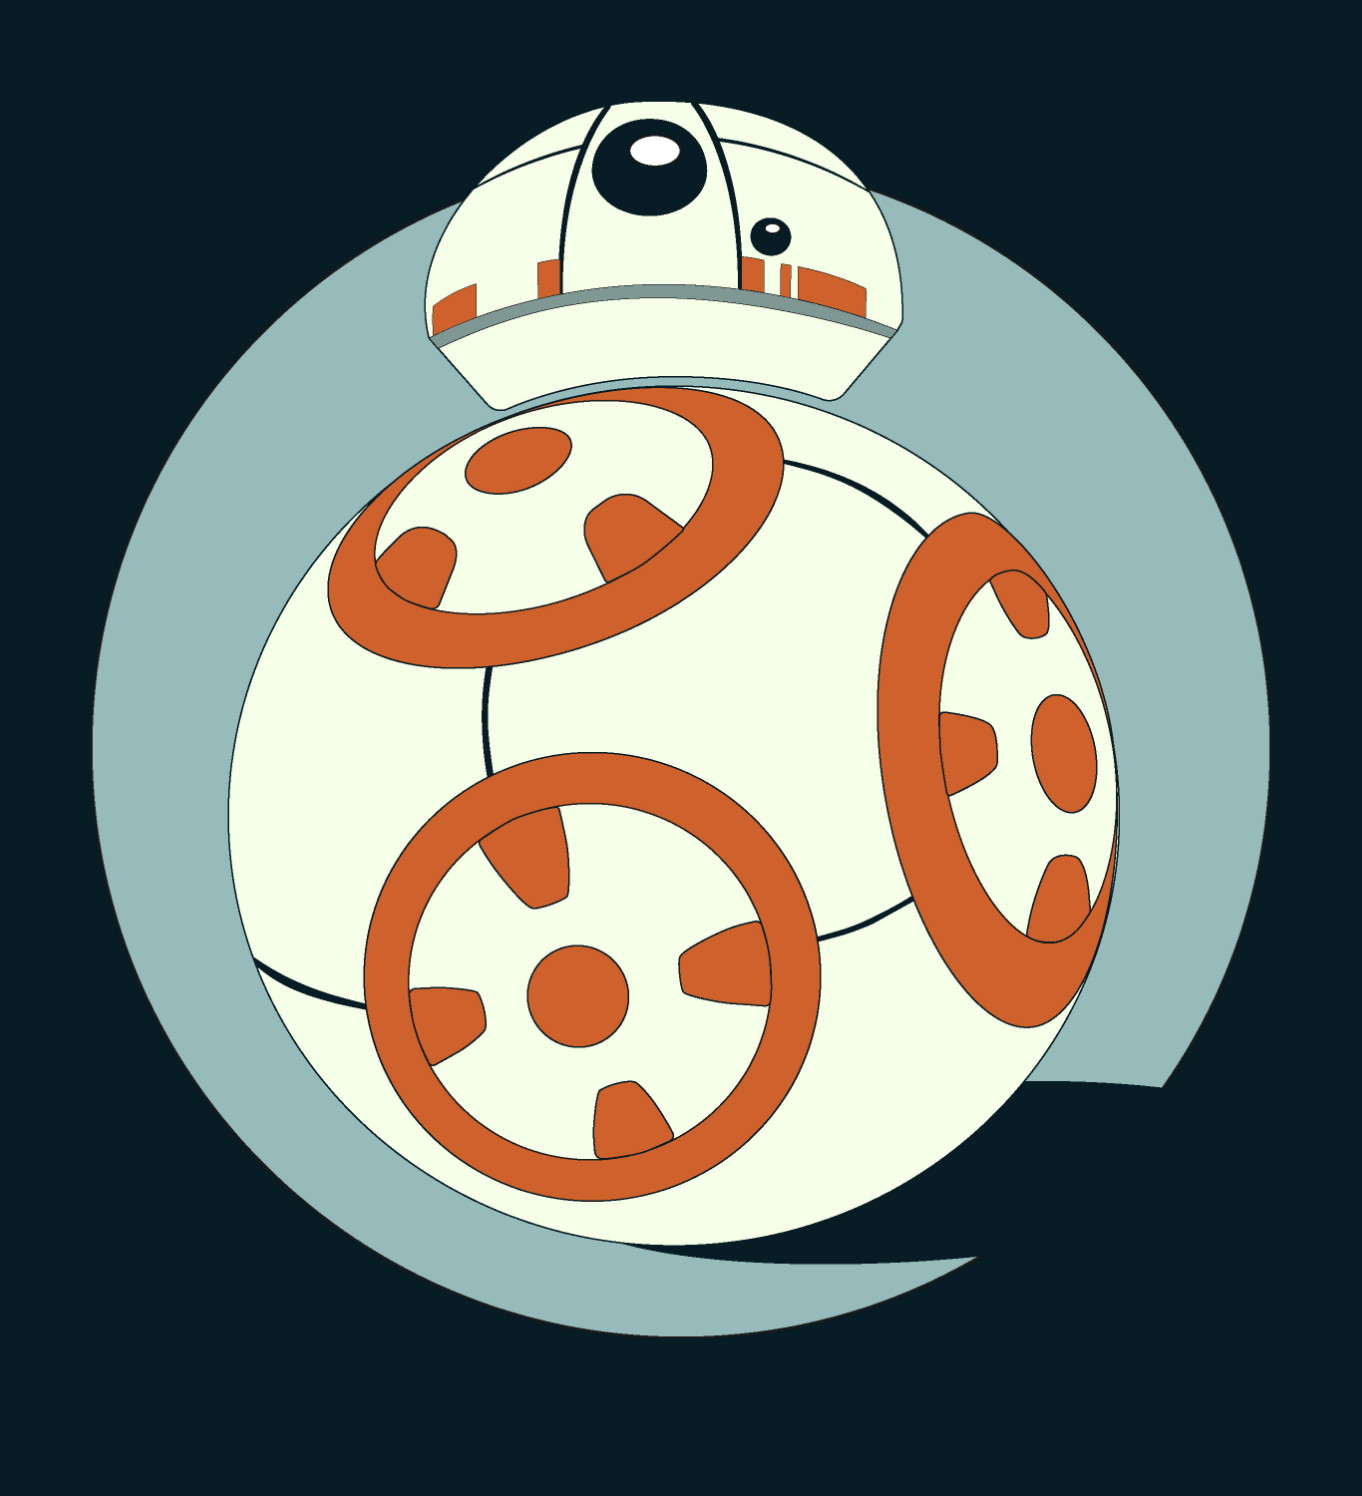 rsp-icons-bb8.png